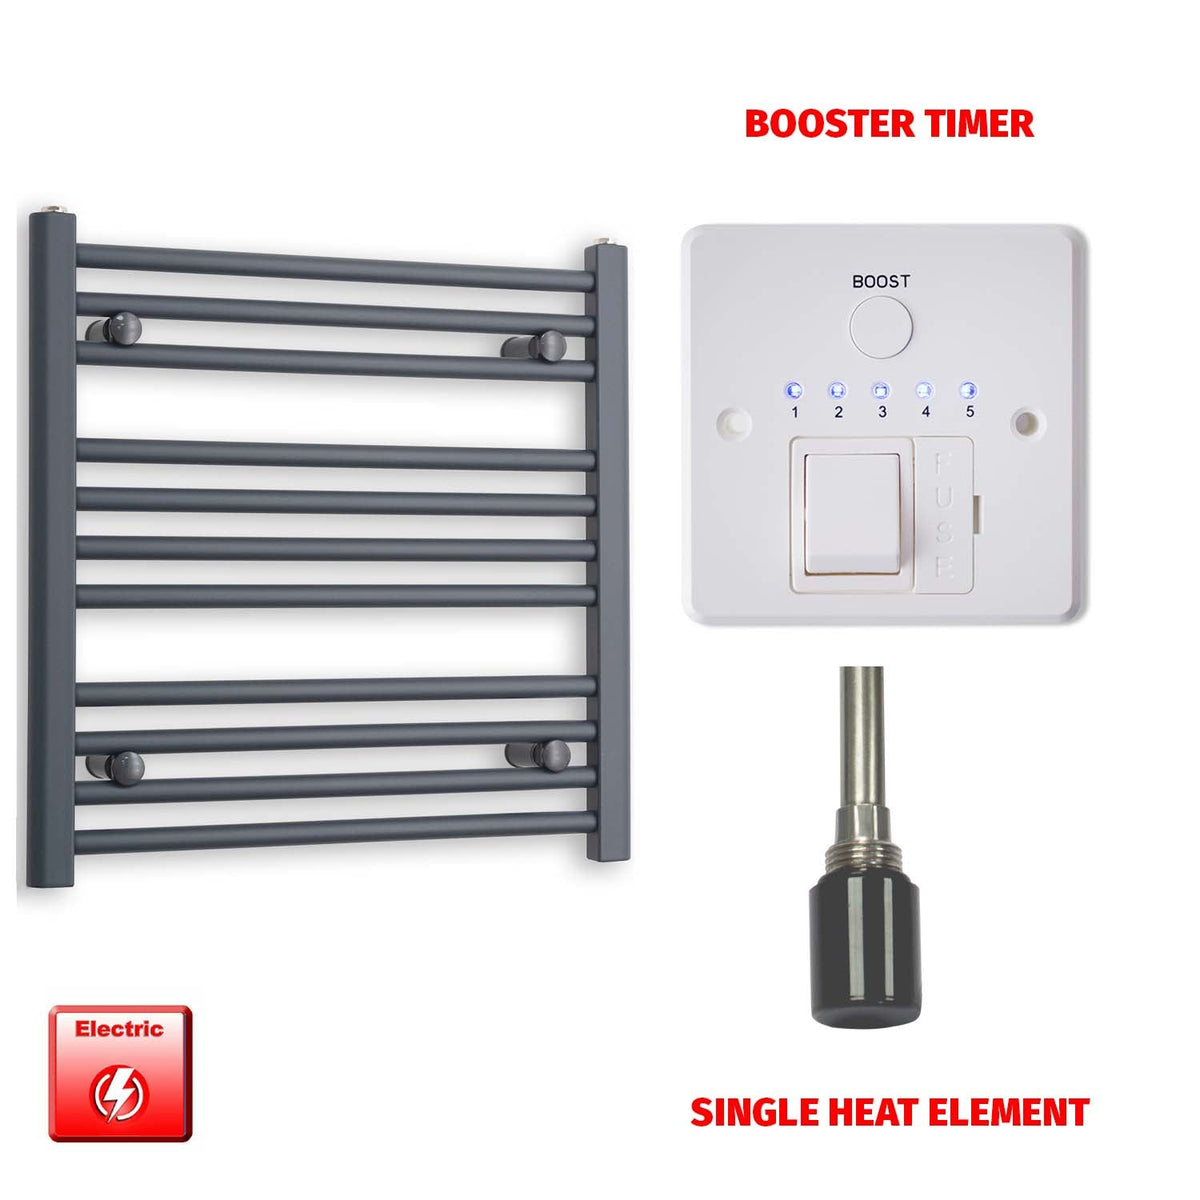 600mm High 600mm Wide Flat Anthracite Pre-Filled Electric Heated Towel Rail Radiator HTR Single heat element Boostertimer